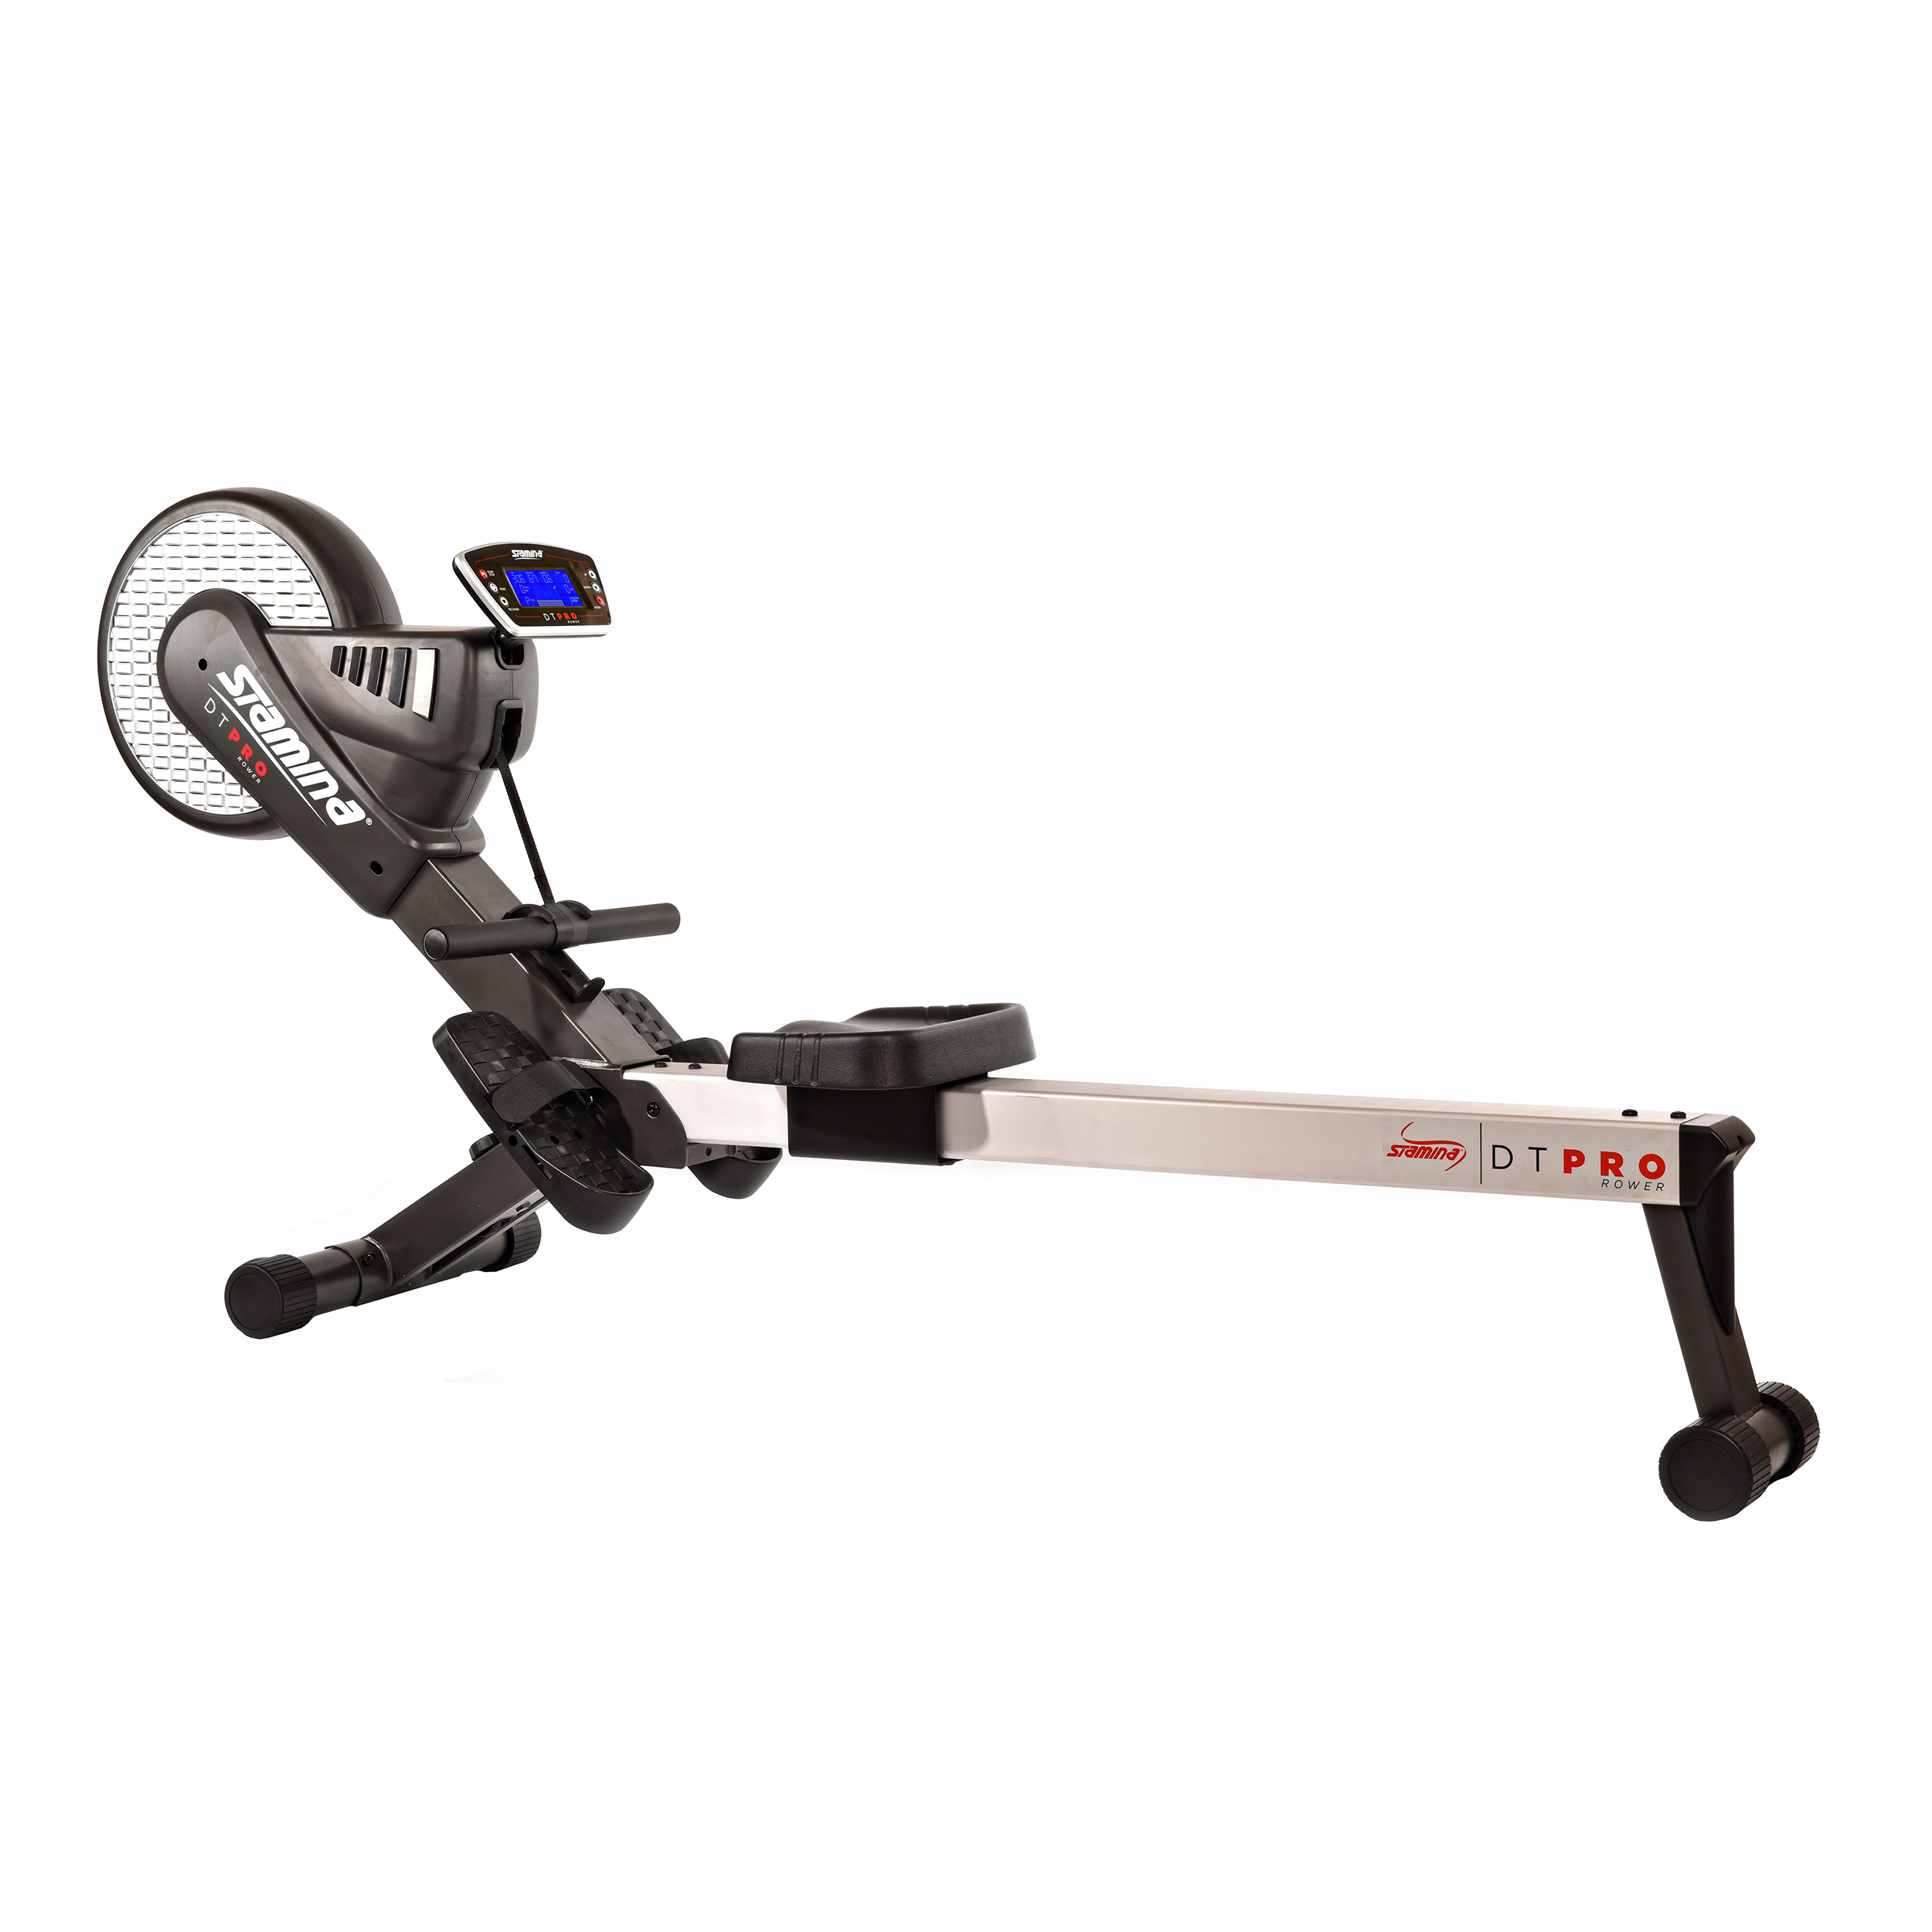 DT Pro Rower Machine on Stamina Product home equipment exercise